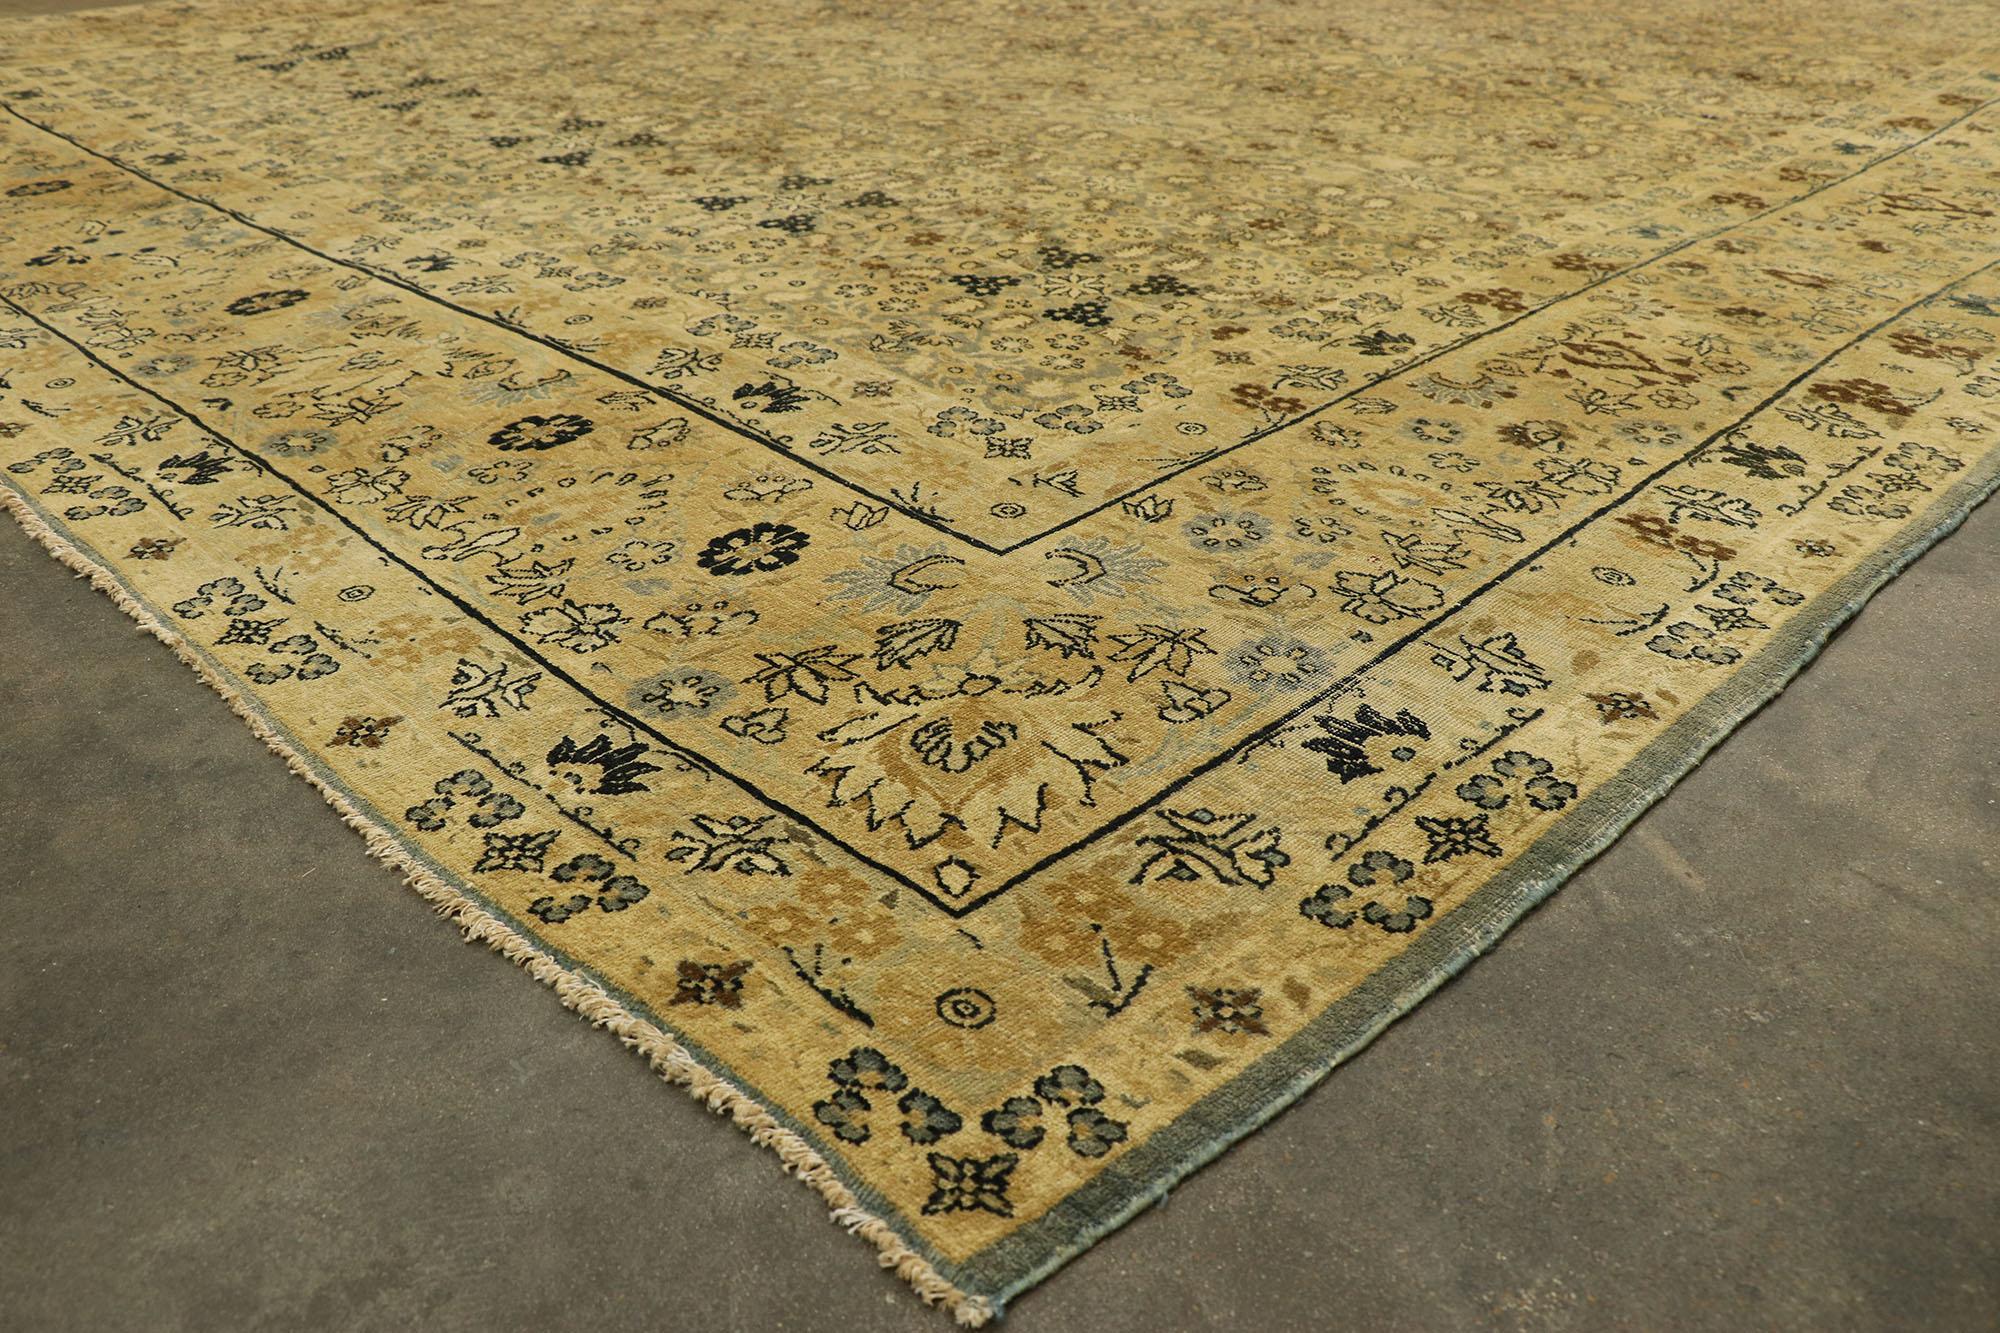 76701 Antique Persian Kerman Rug, 11'02 x 15'02. Kerman rugs hail from the city of Kerman, situated in south-central Iran. This city holds esteemed status as one of Iran's principal weaving hubs, with a rich legacy of crafting top-tier Persian